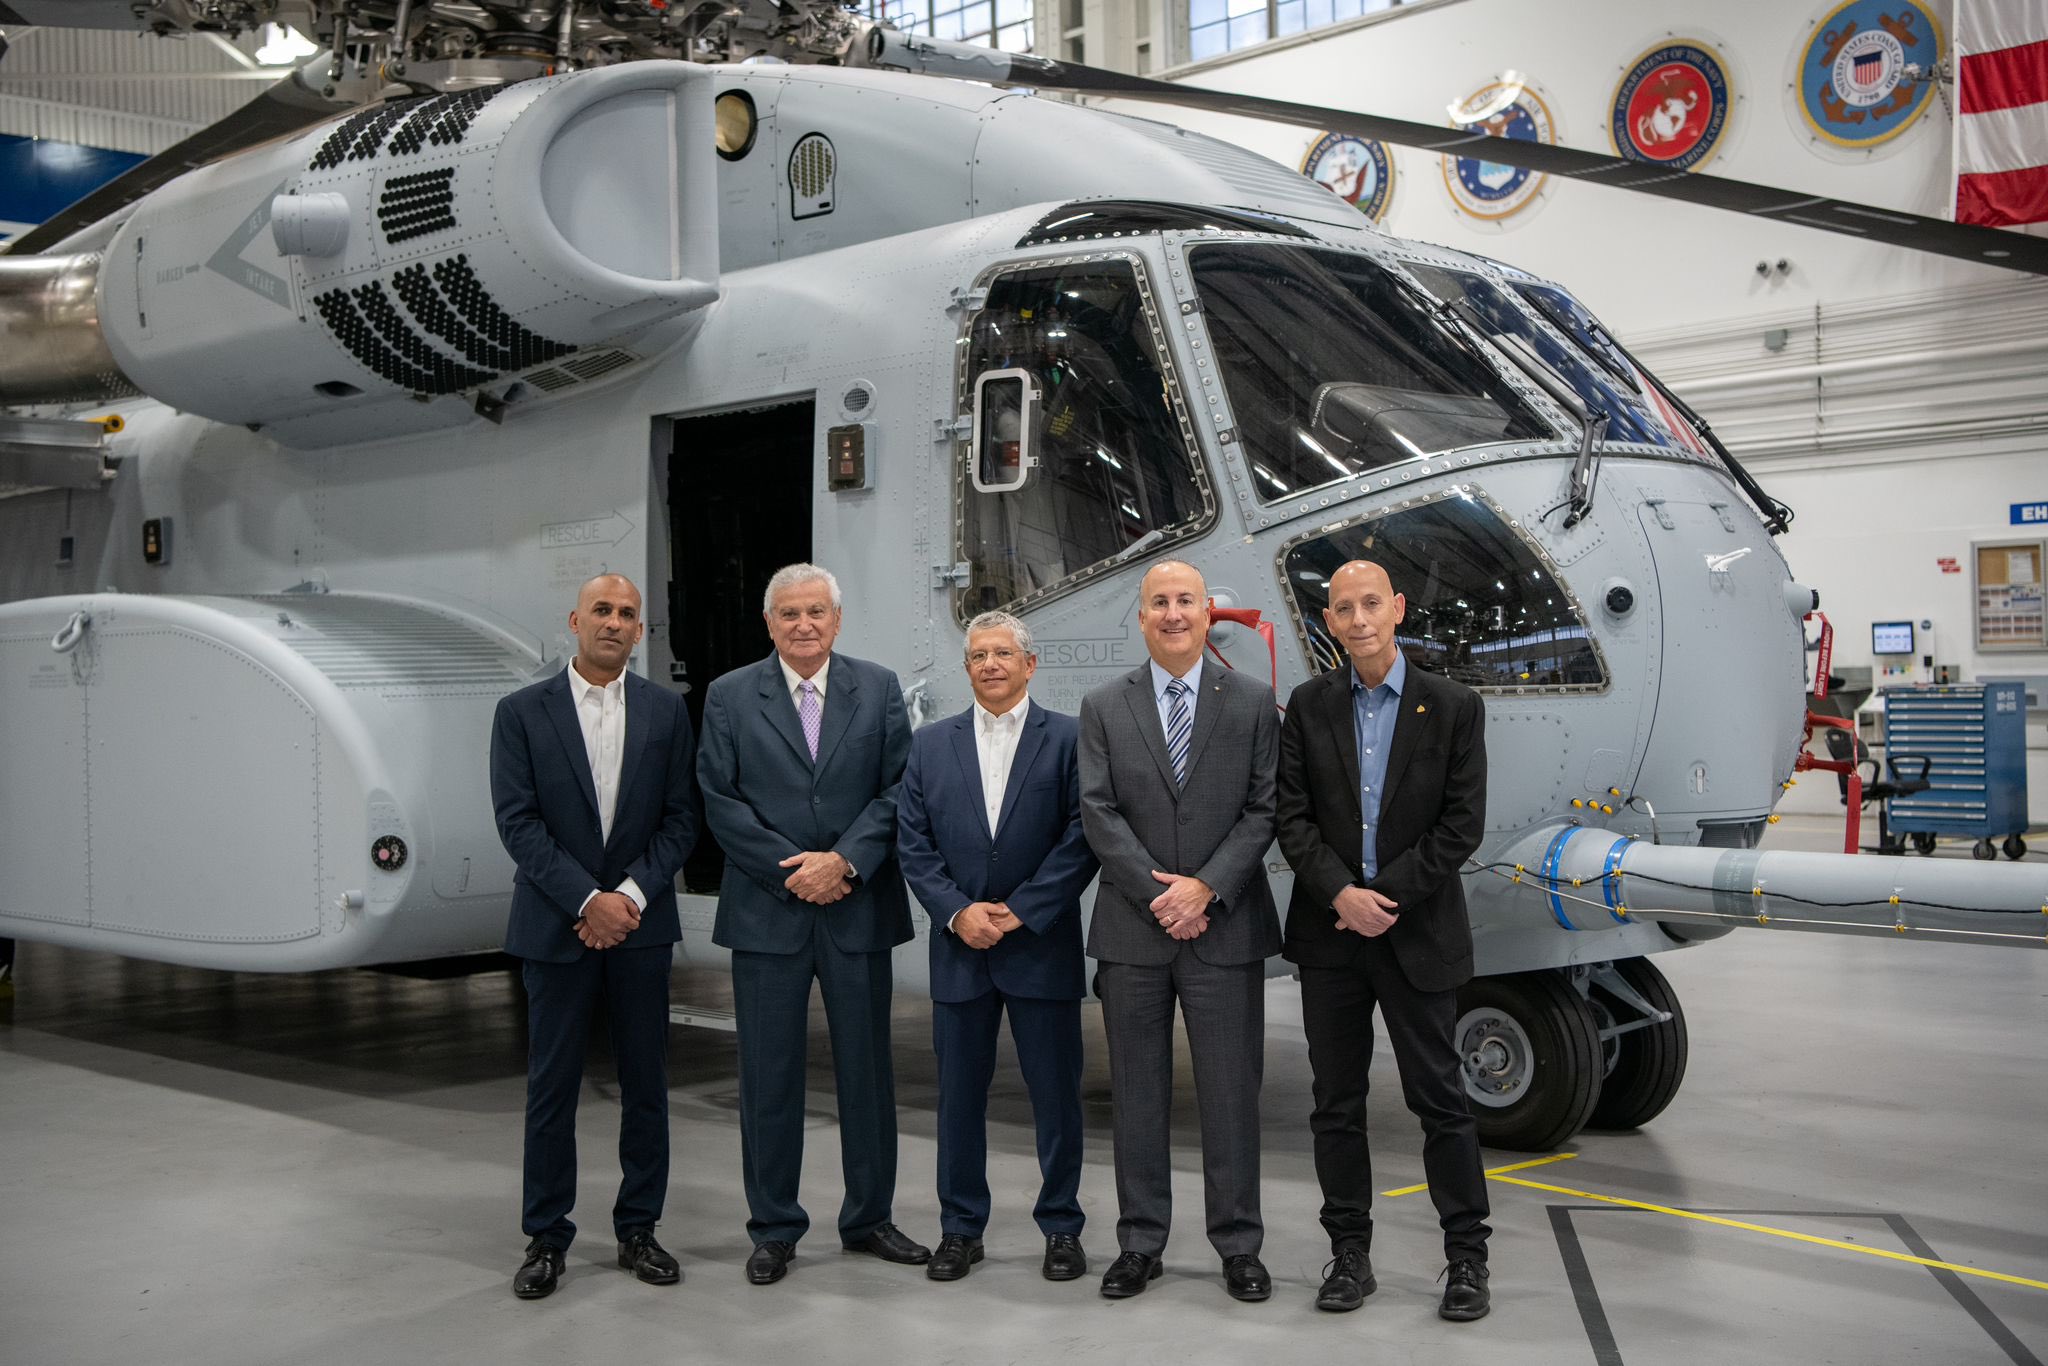 Israel  Acquiring  New Sikorsky CH-53K  Helicopters  from US  ,  Assembly Line  visit  by  Director General of Israel’s  Ministry of Defense  is  latest  post Deal !